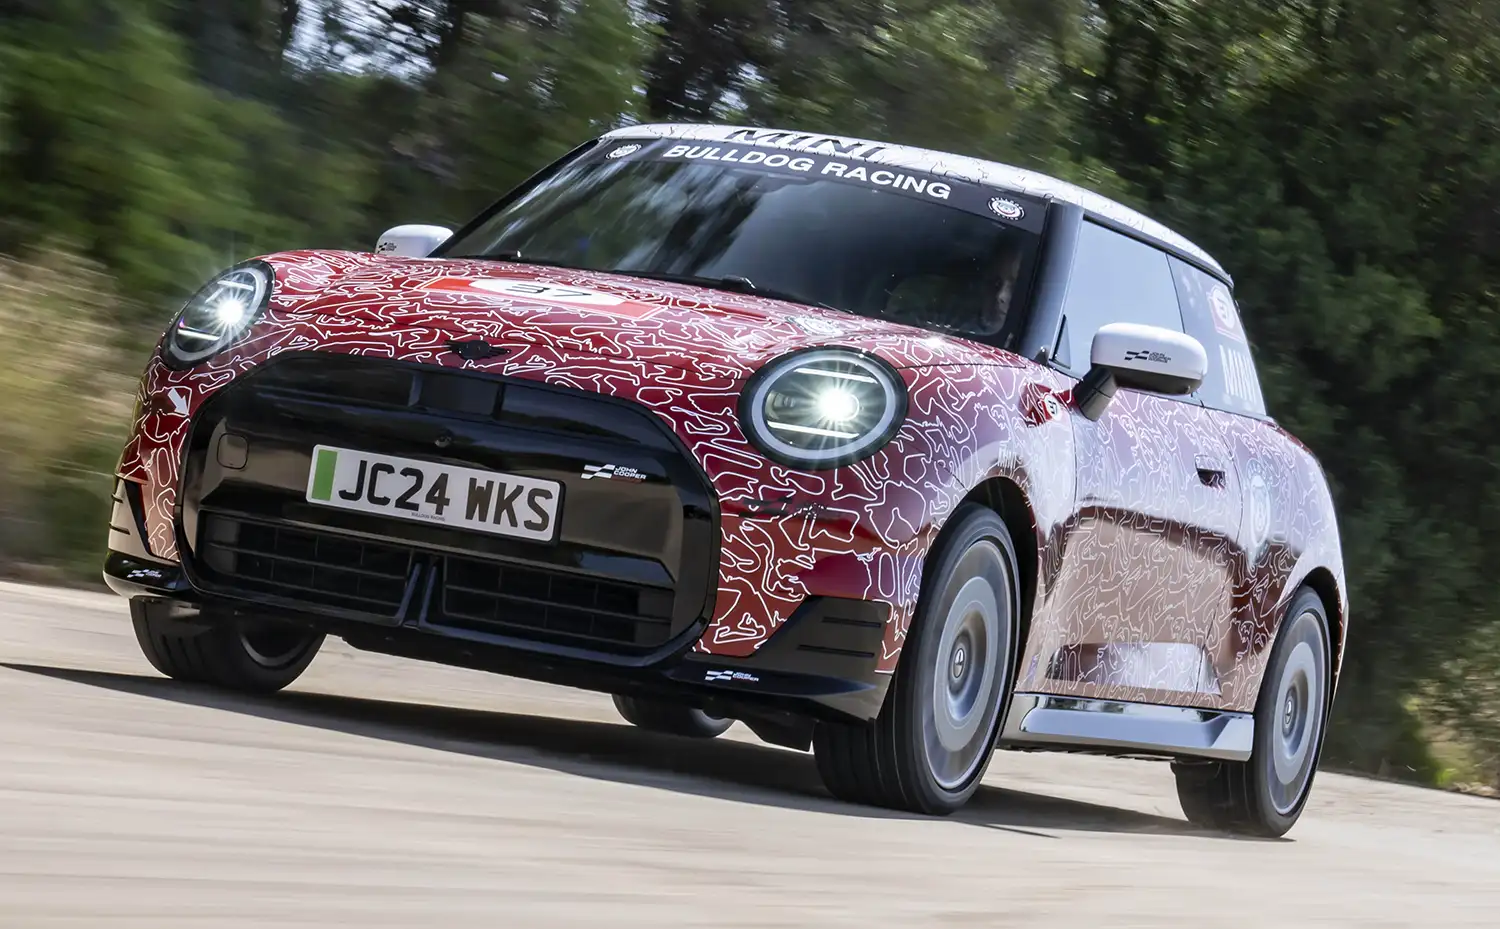 First Electric MINI John Cooper Works Debuts at Goodwood